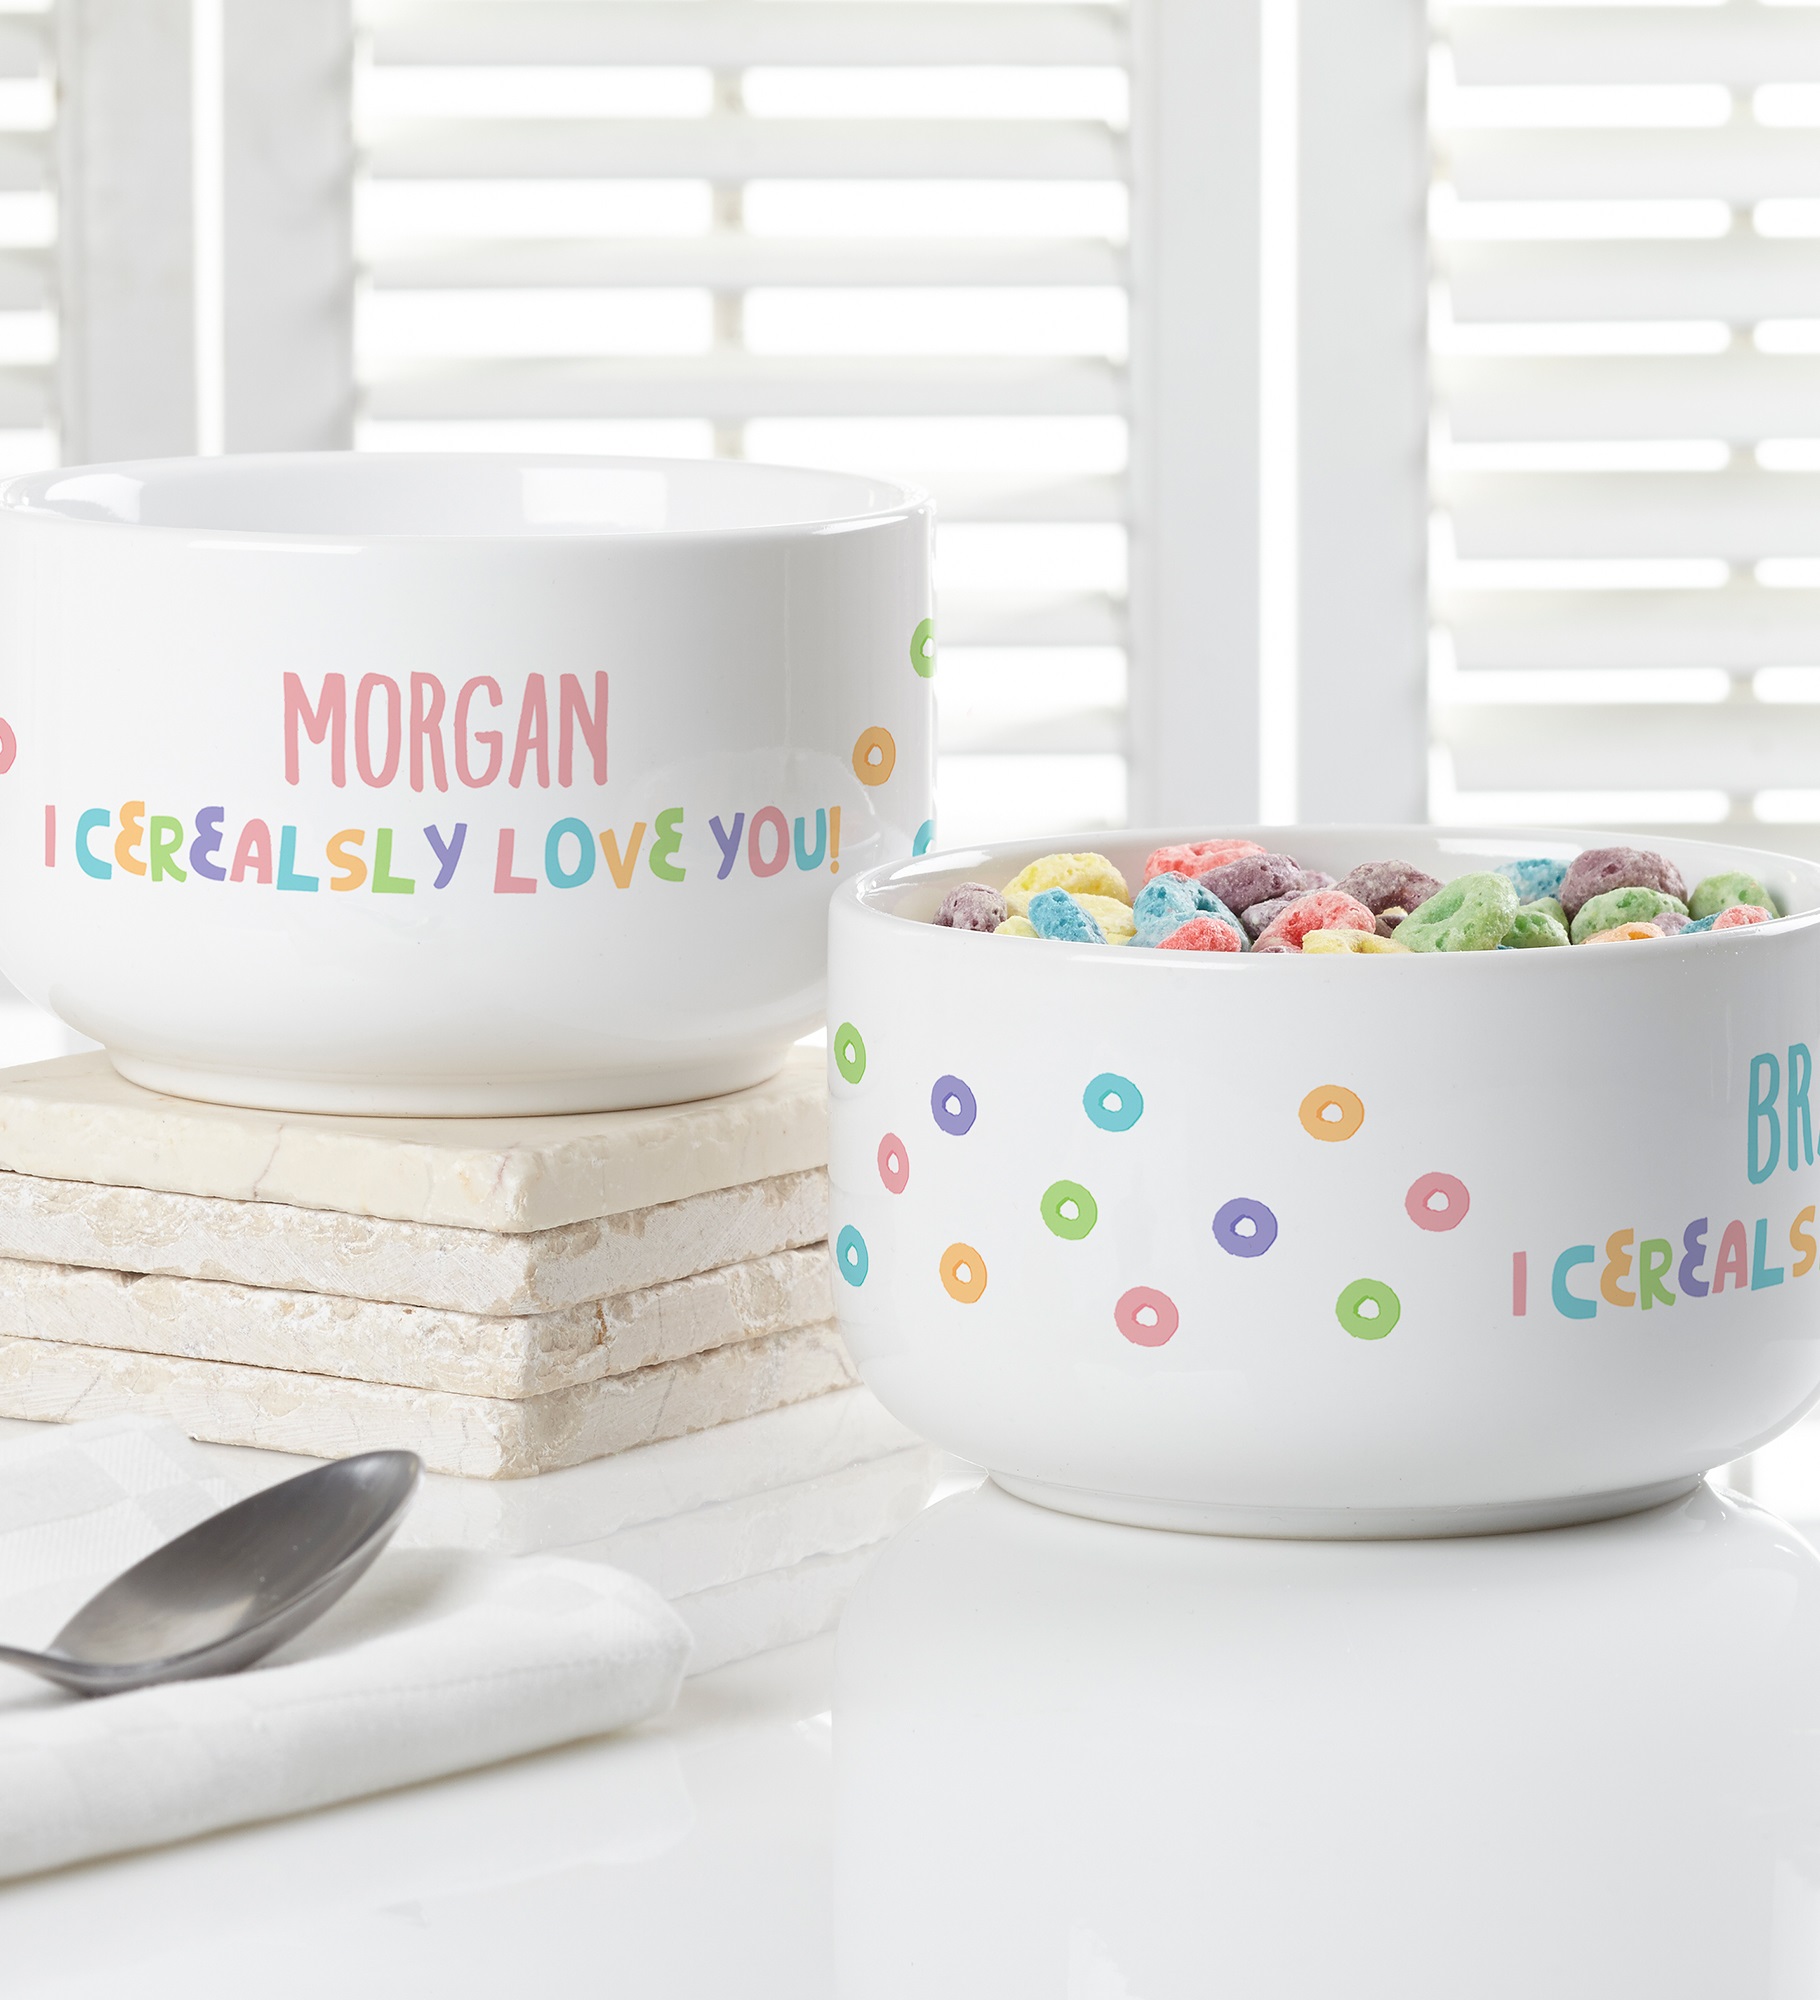 I Cerealsly Love You Personalized 14 oz. Kids Cereal Bowl